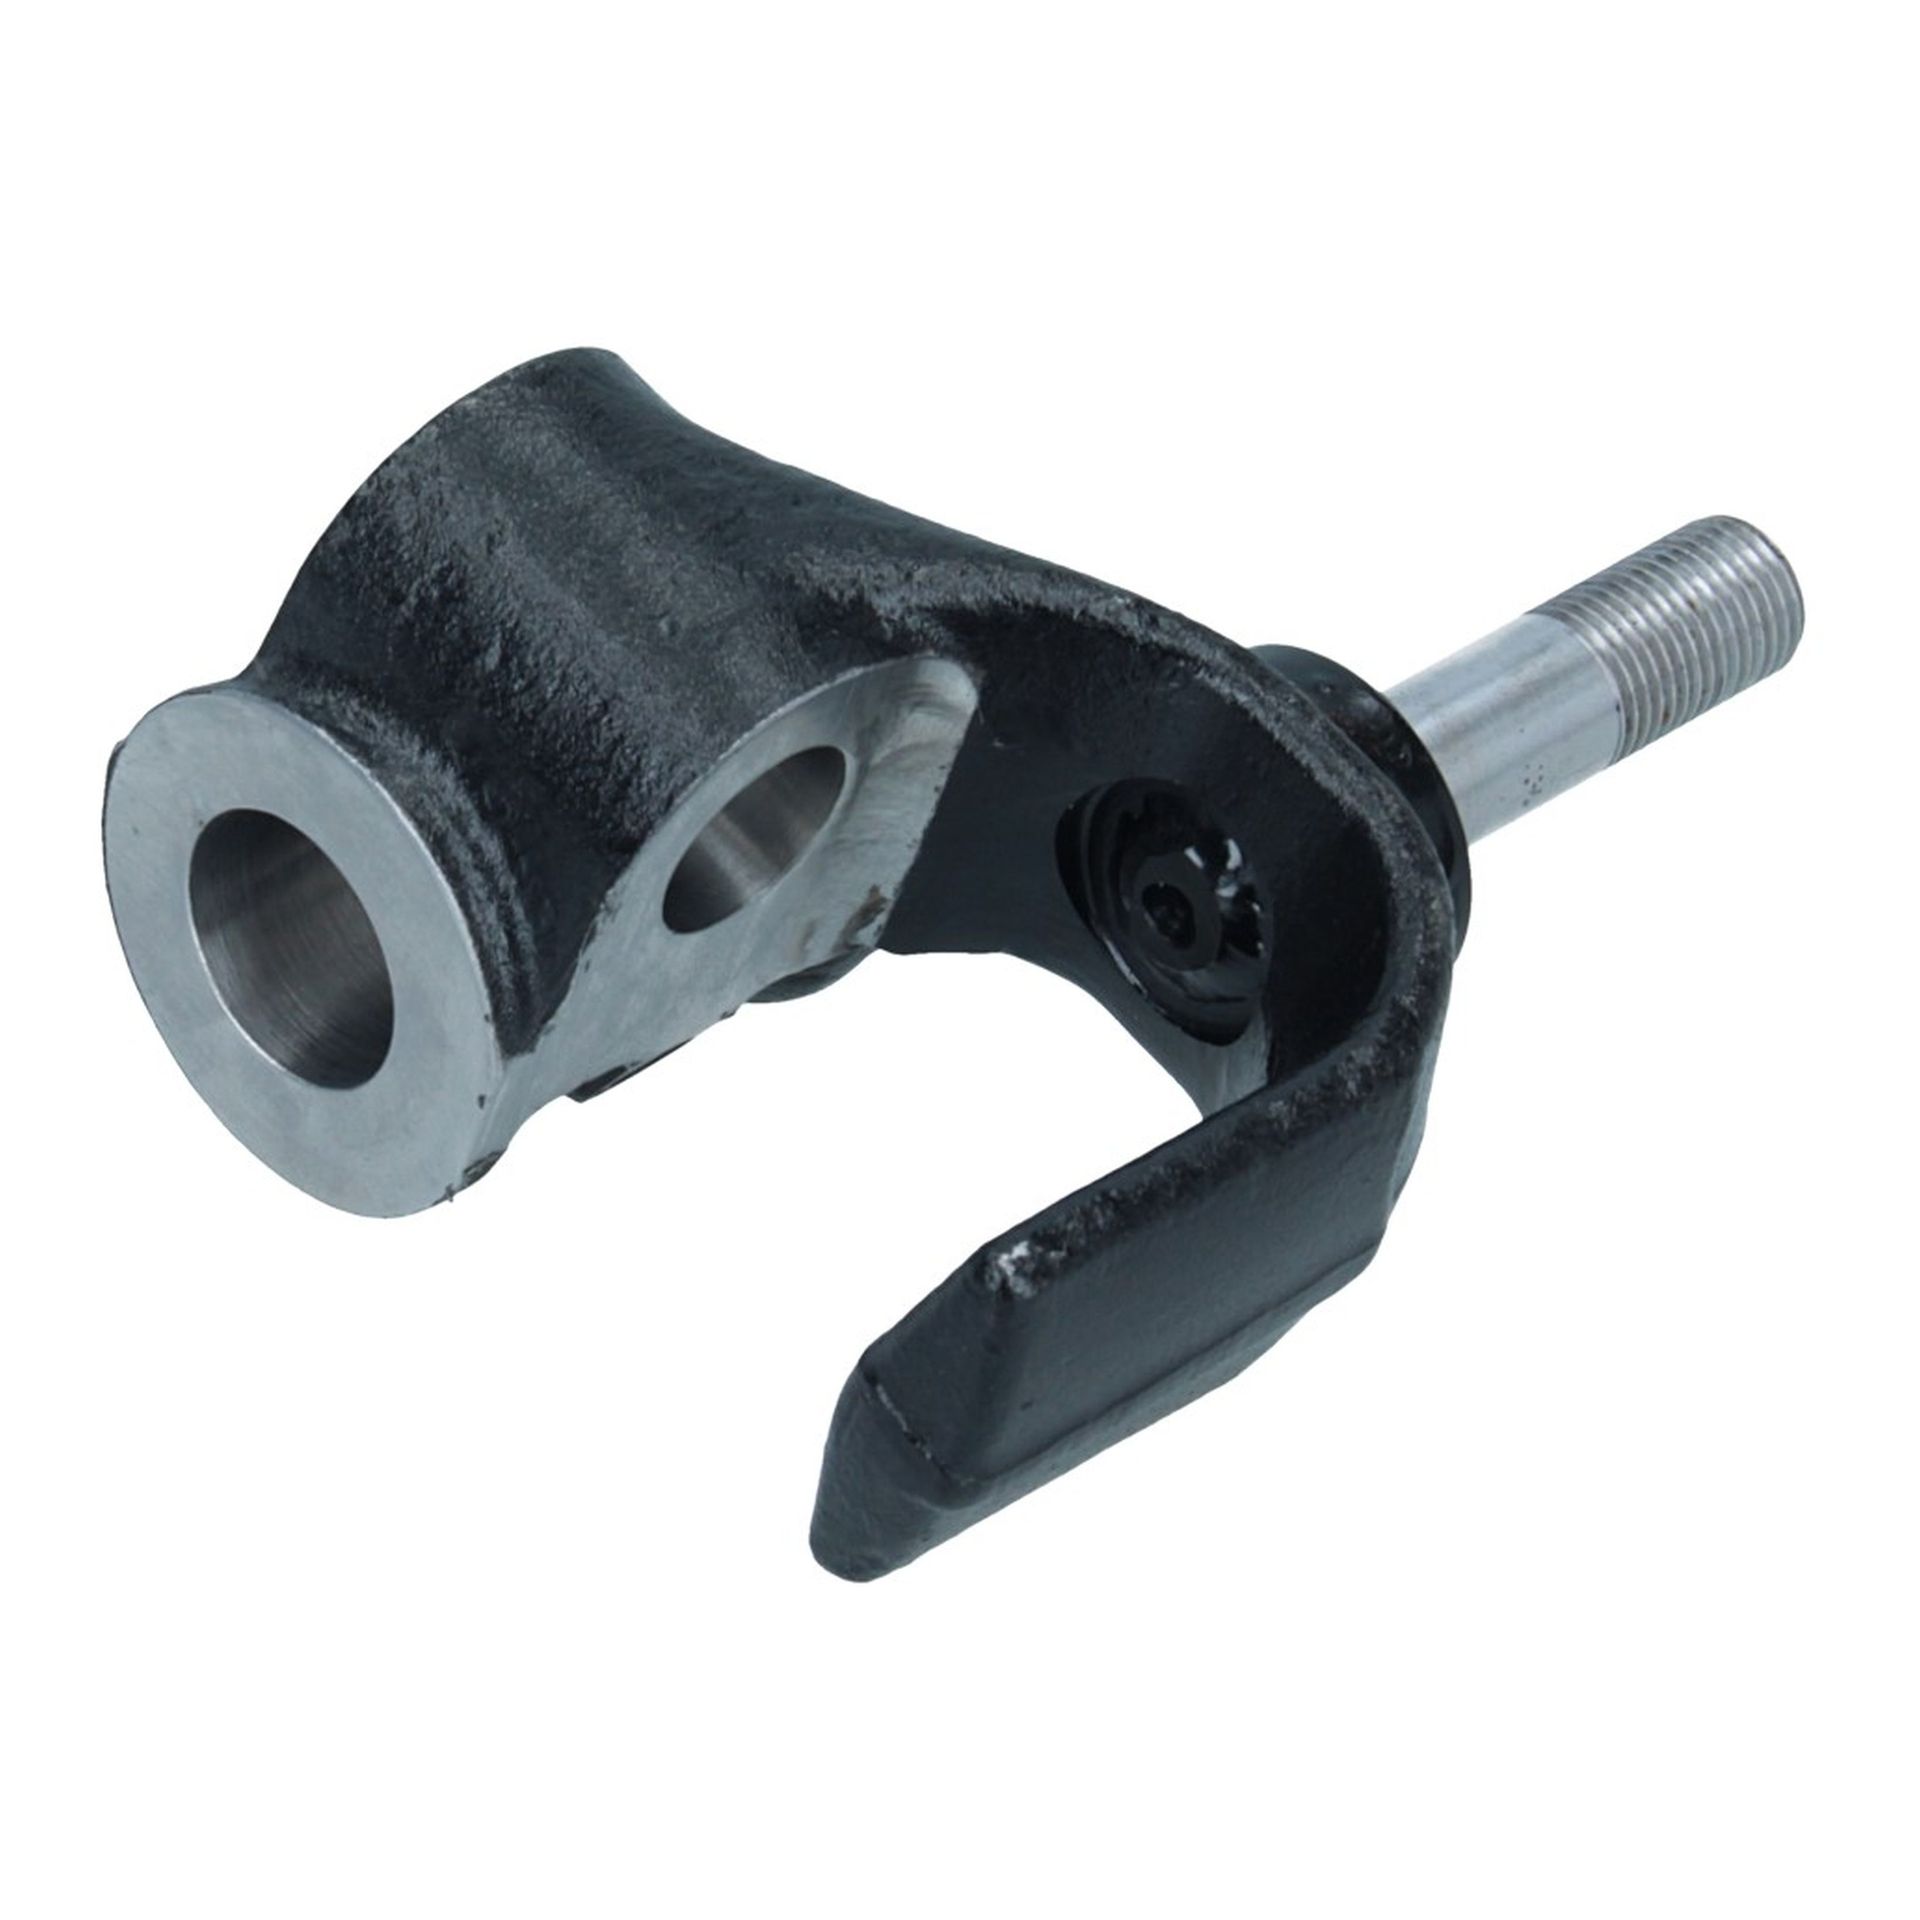 Top Knuckle Joint N/S LH